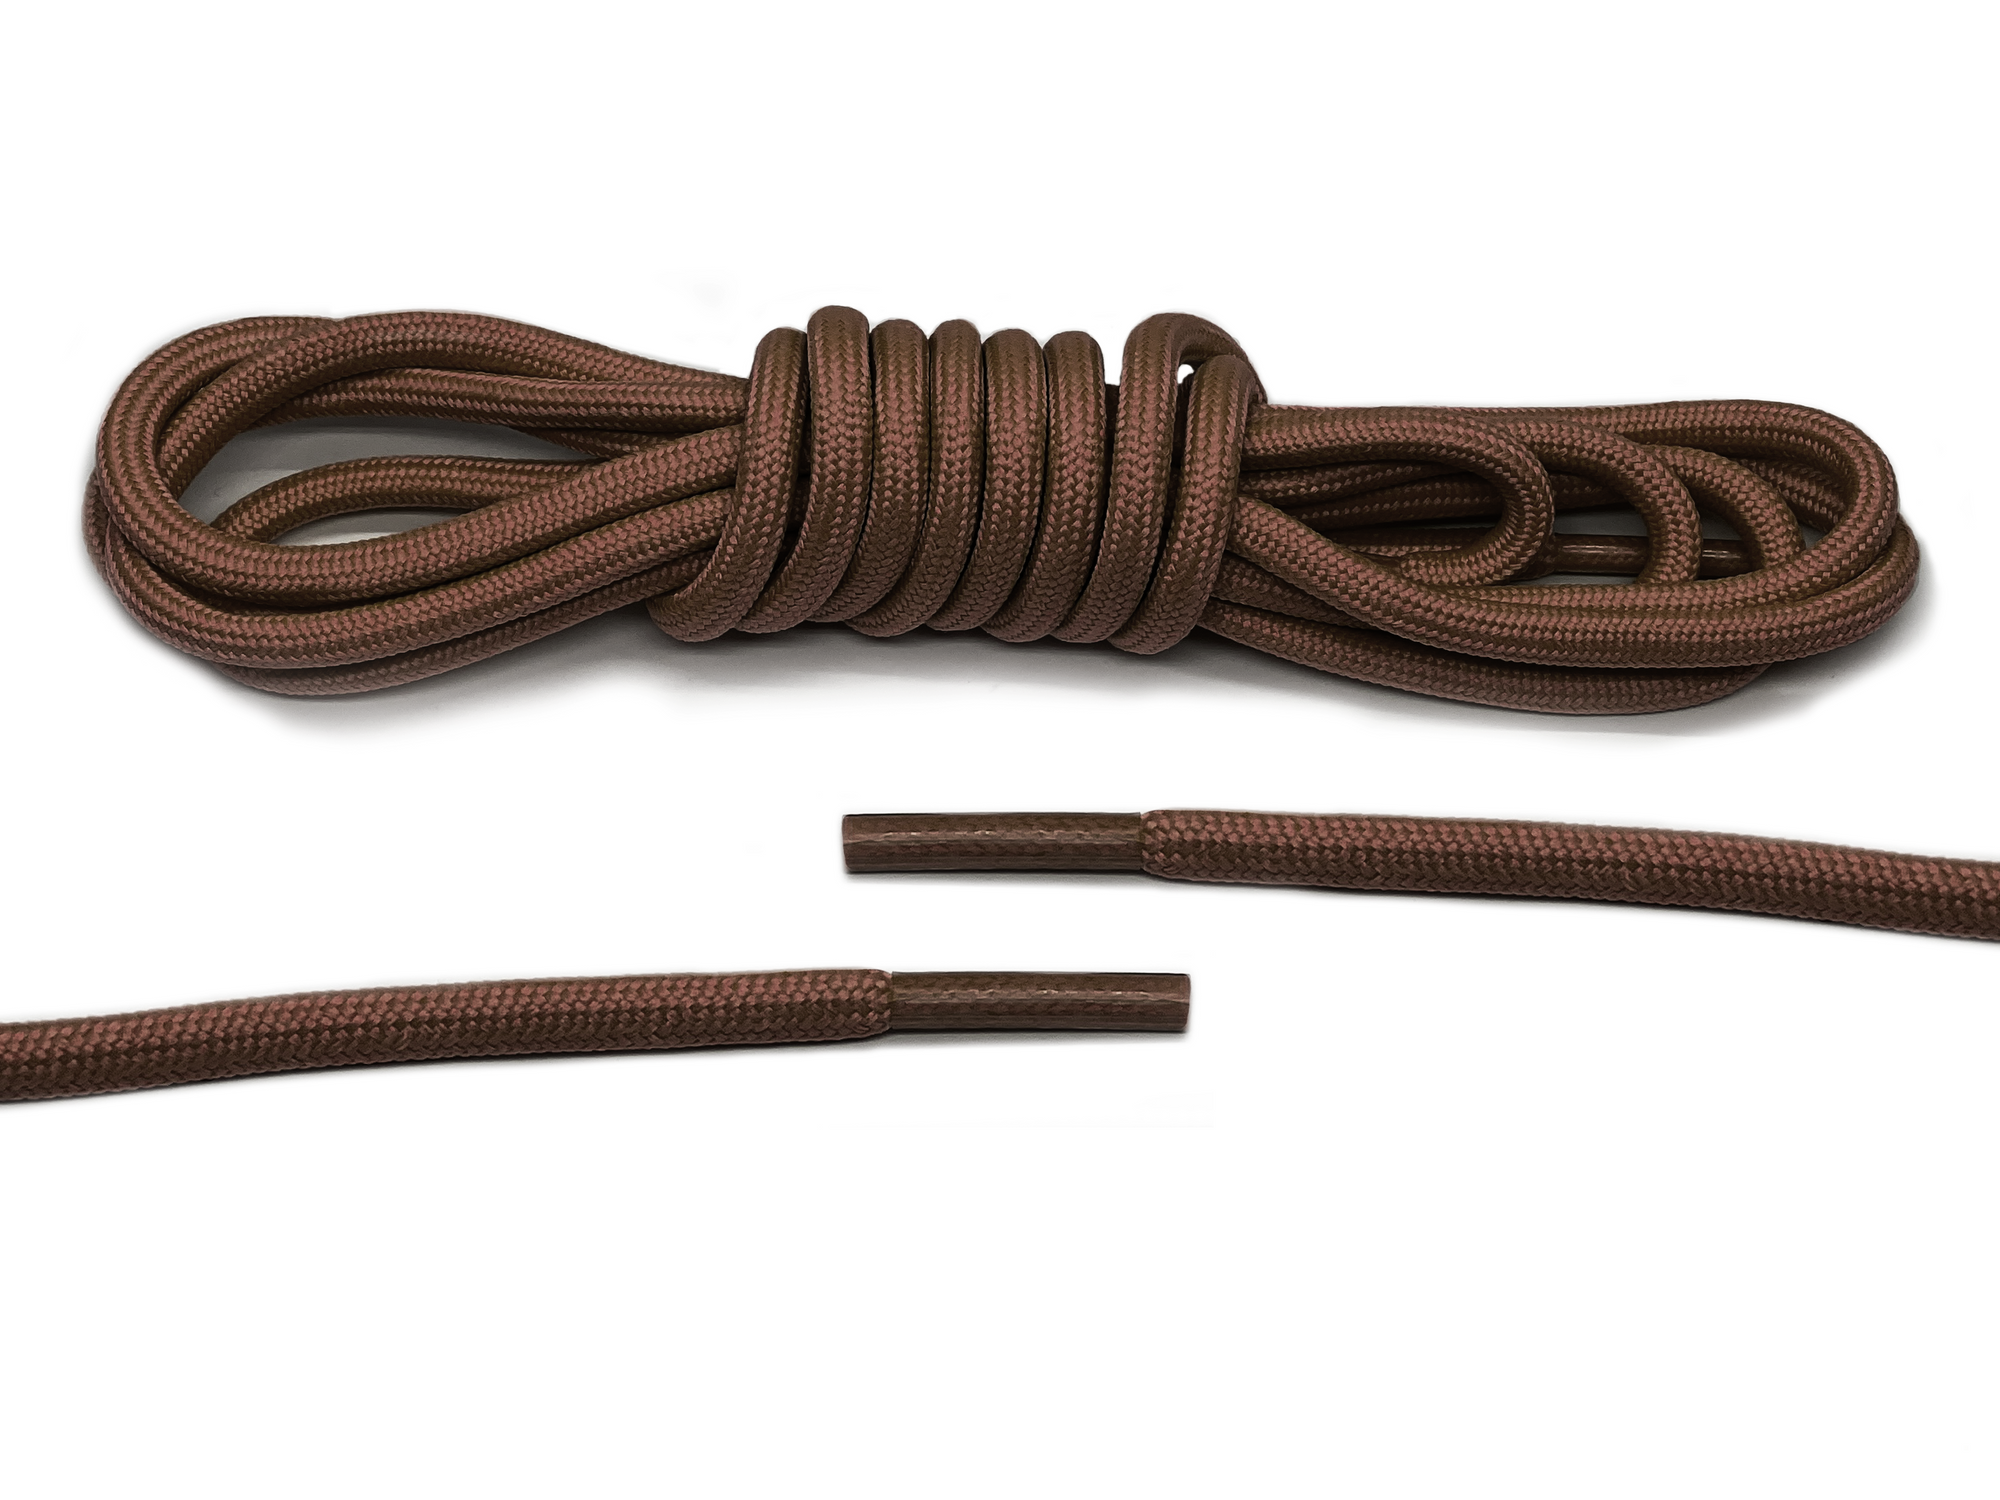 The Brown Round Shoe Lace - Belaced